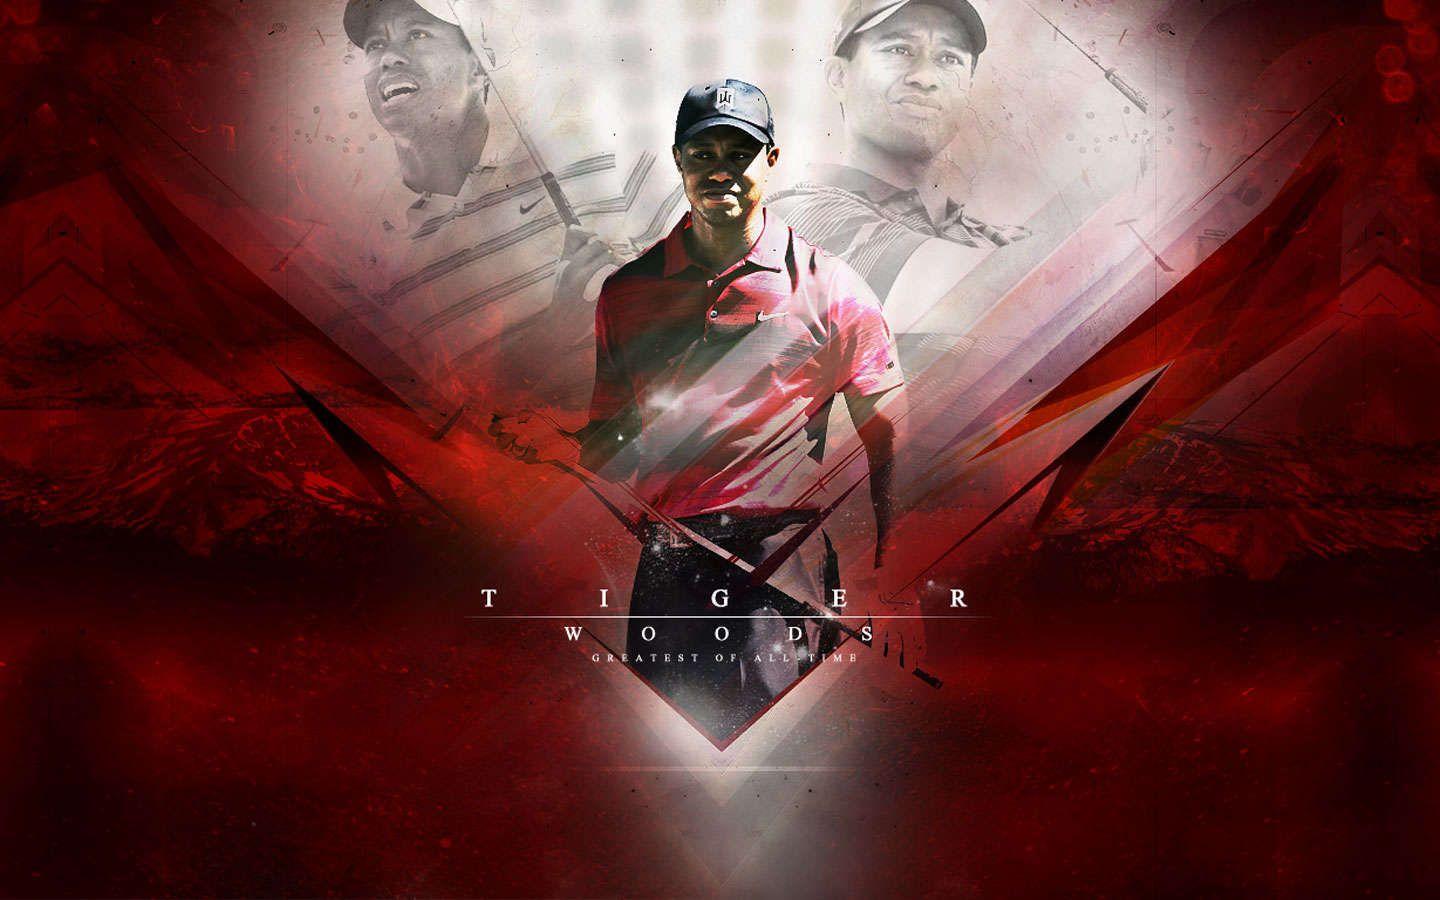  tiger woods wallpaper 25  1920 x 1440  android  iphone hd wallpaper  background download HD Photos  Wallpapers 0 Images  Page 1